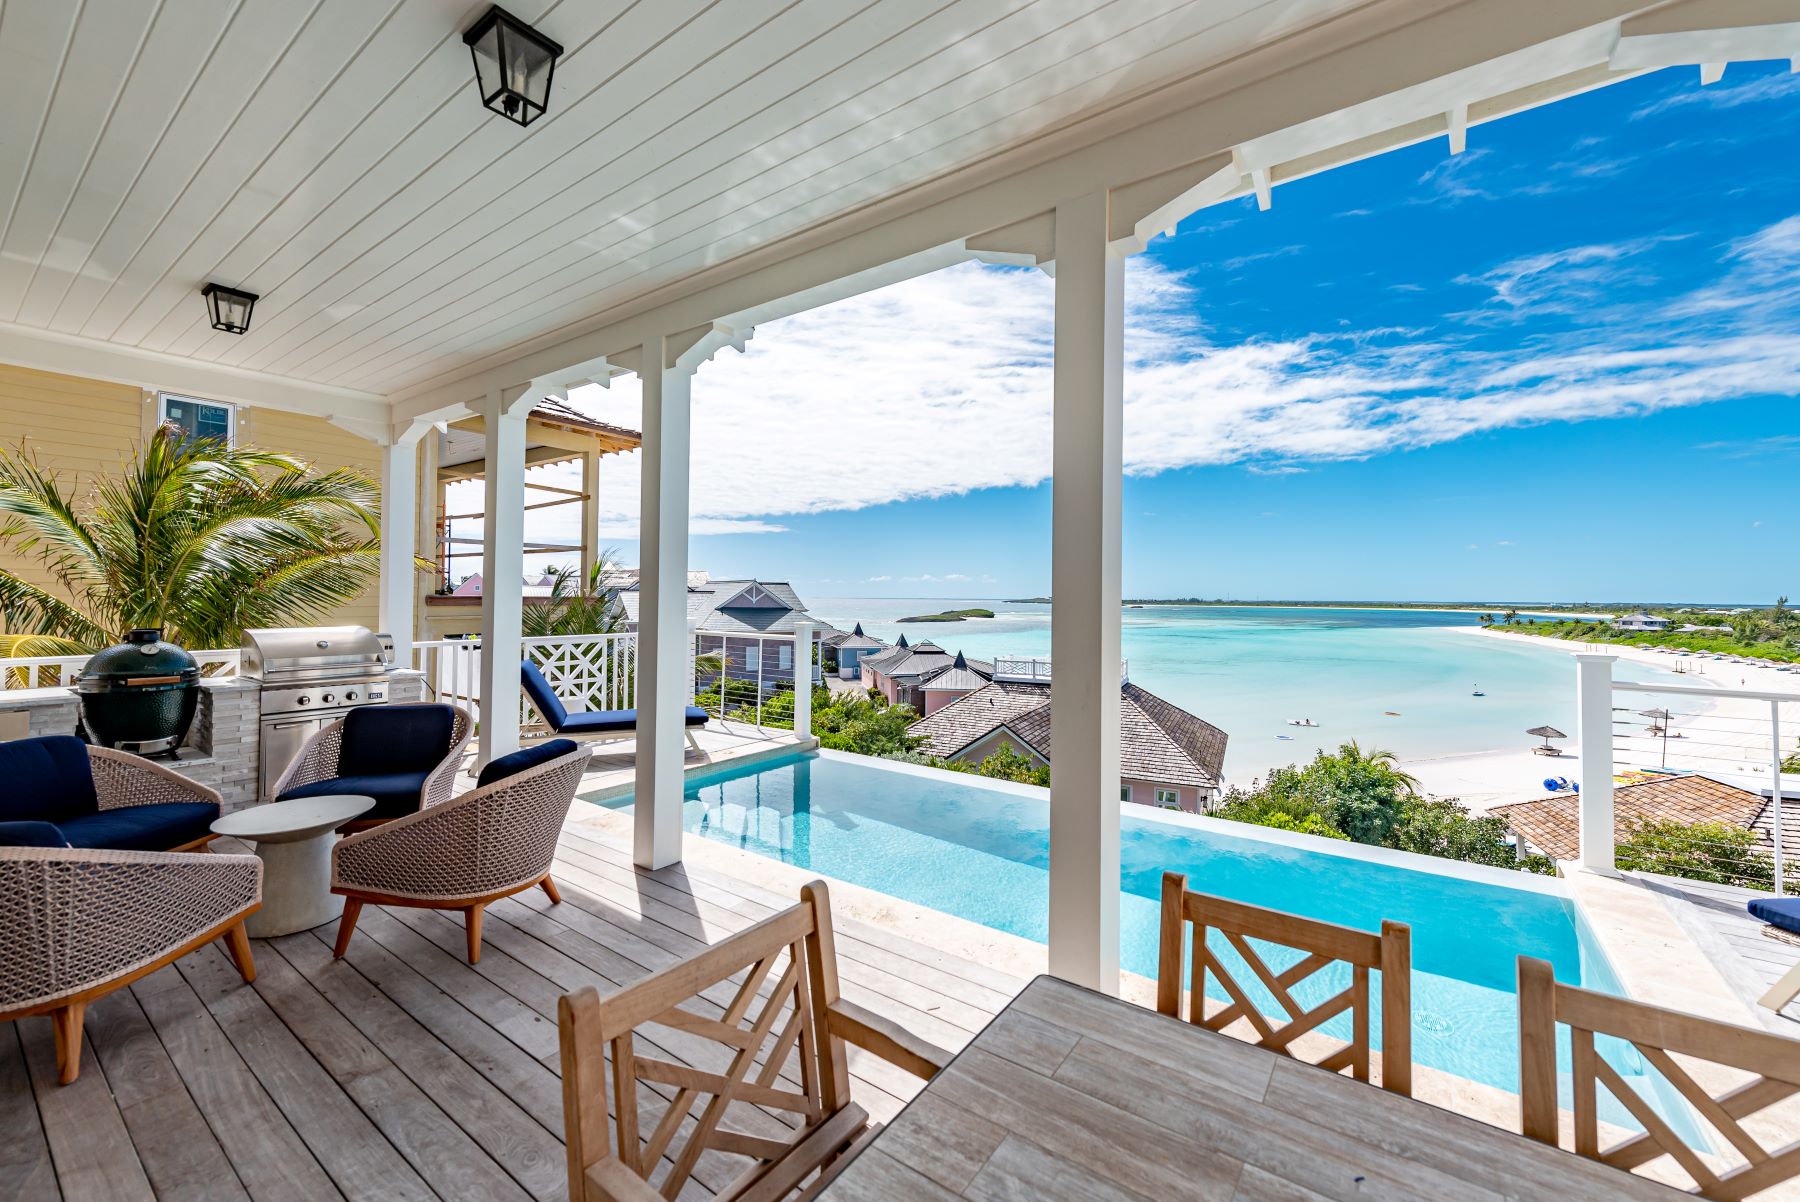 Deck view of a beachfront villa located in The Bahamas at The Abaco Club